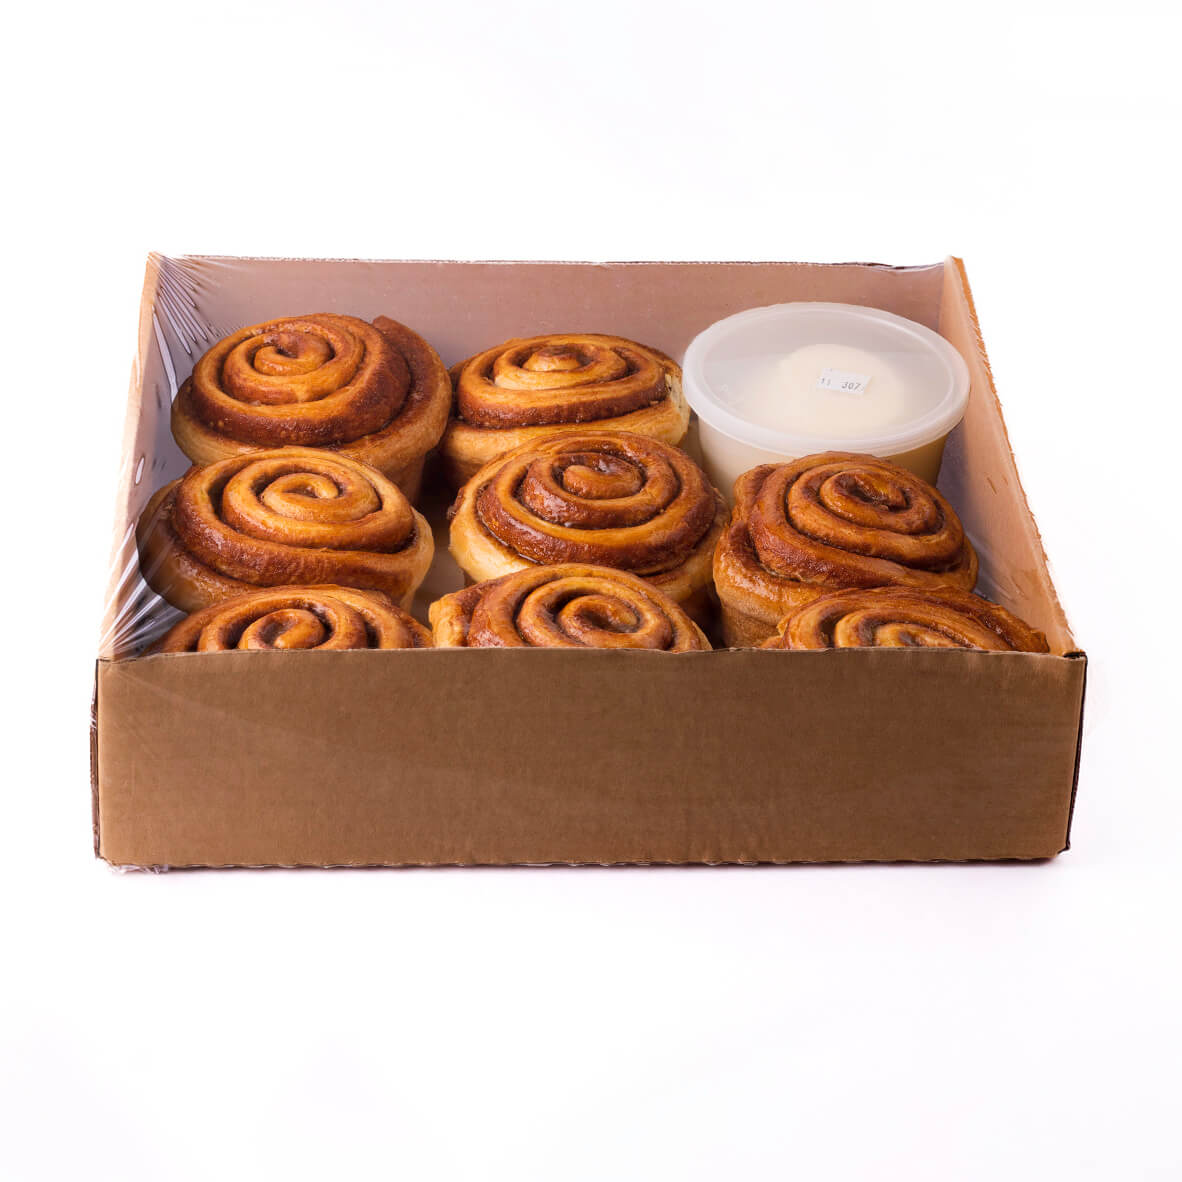 cinnamon buns in box with icing in plastic container